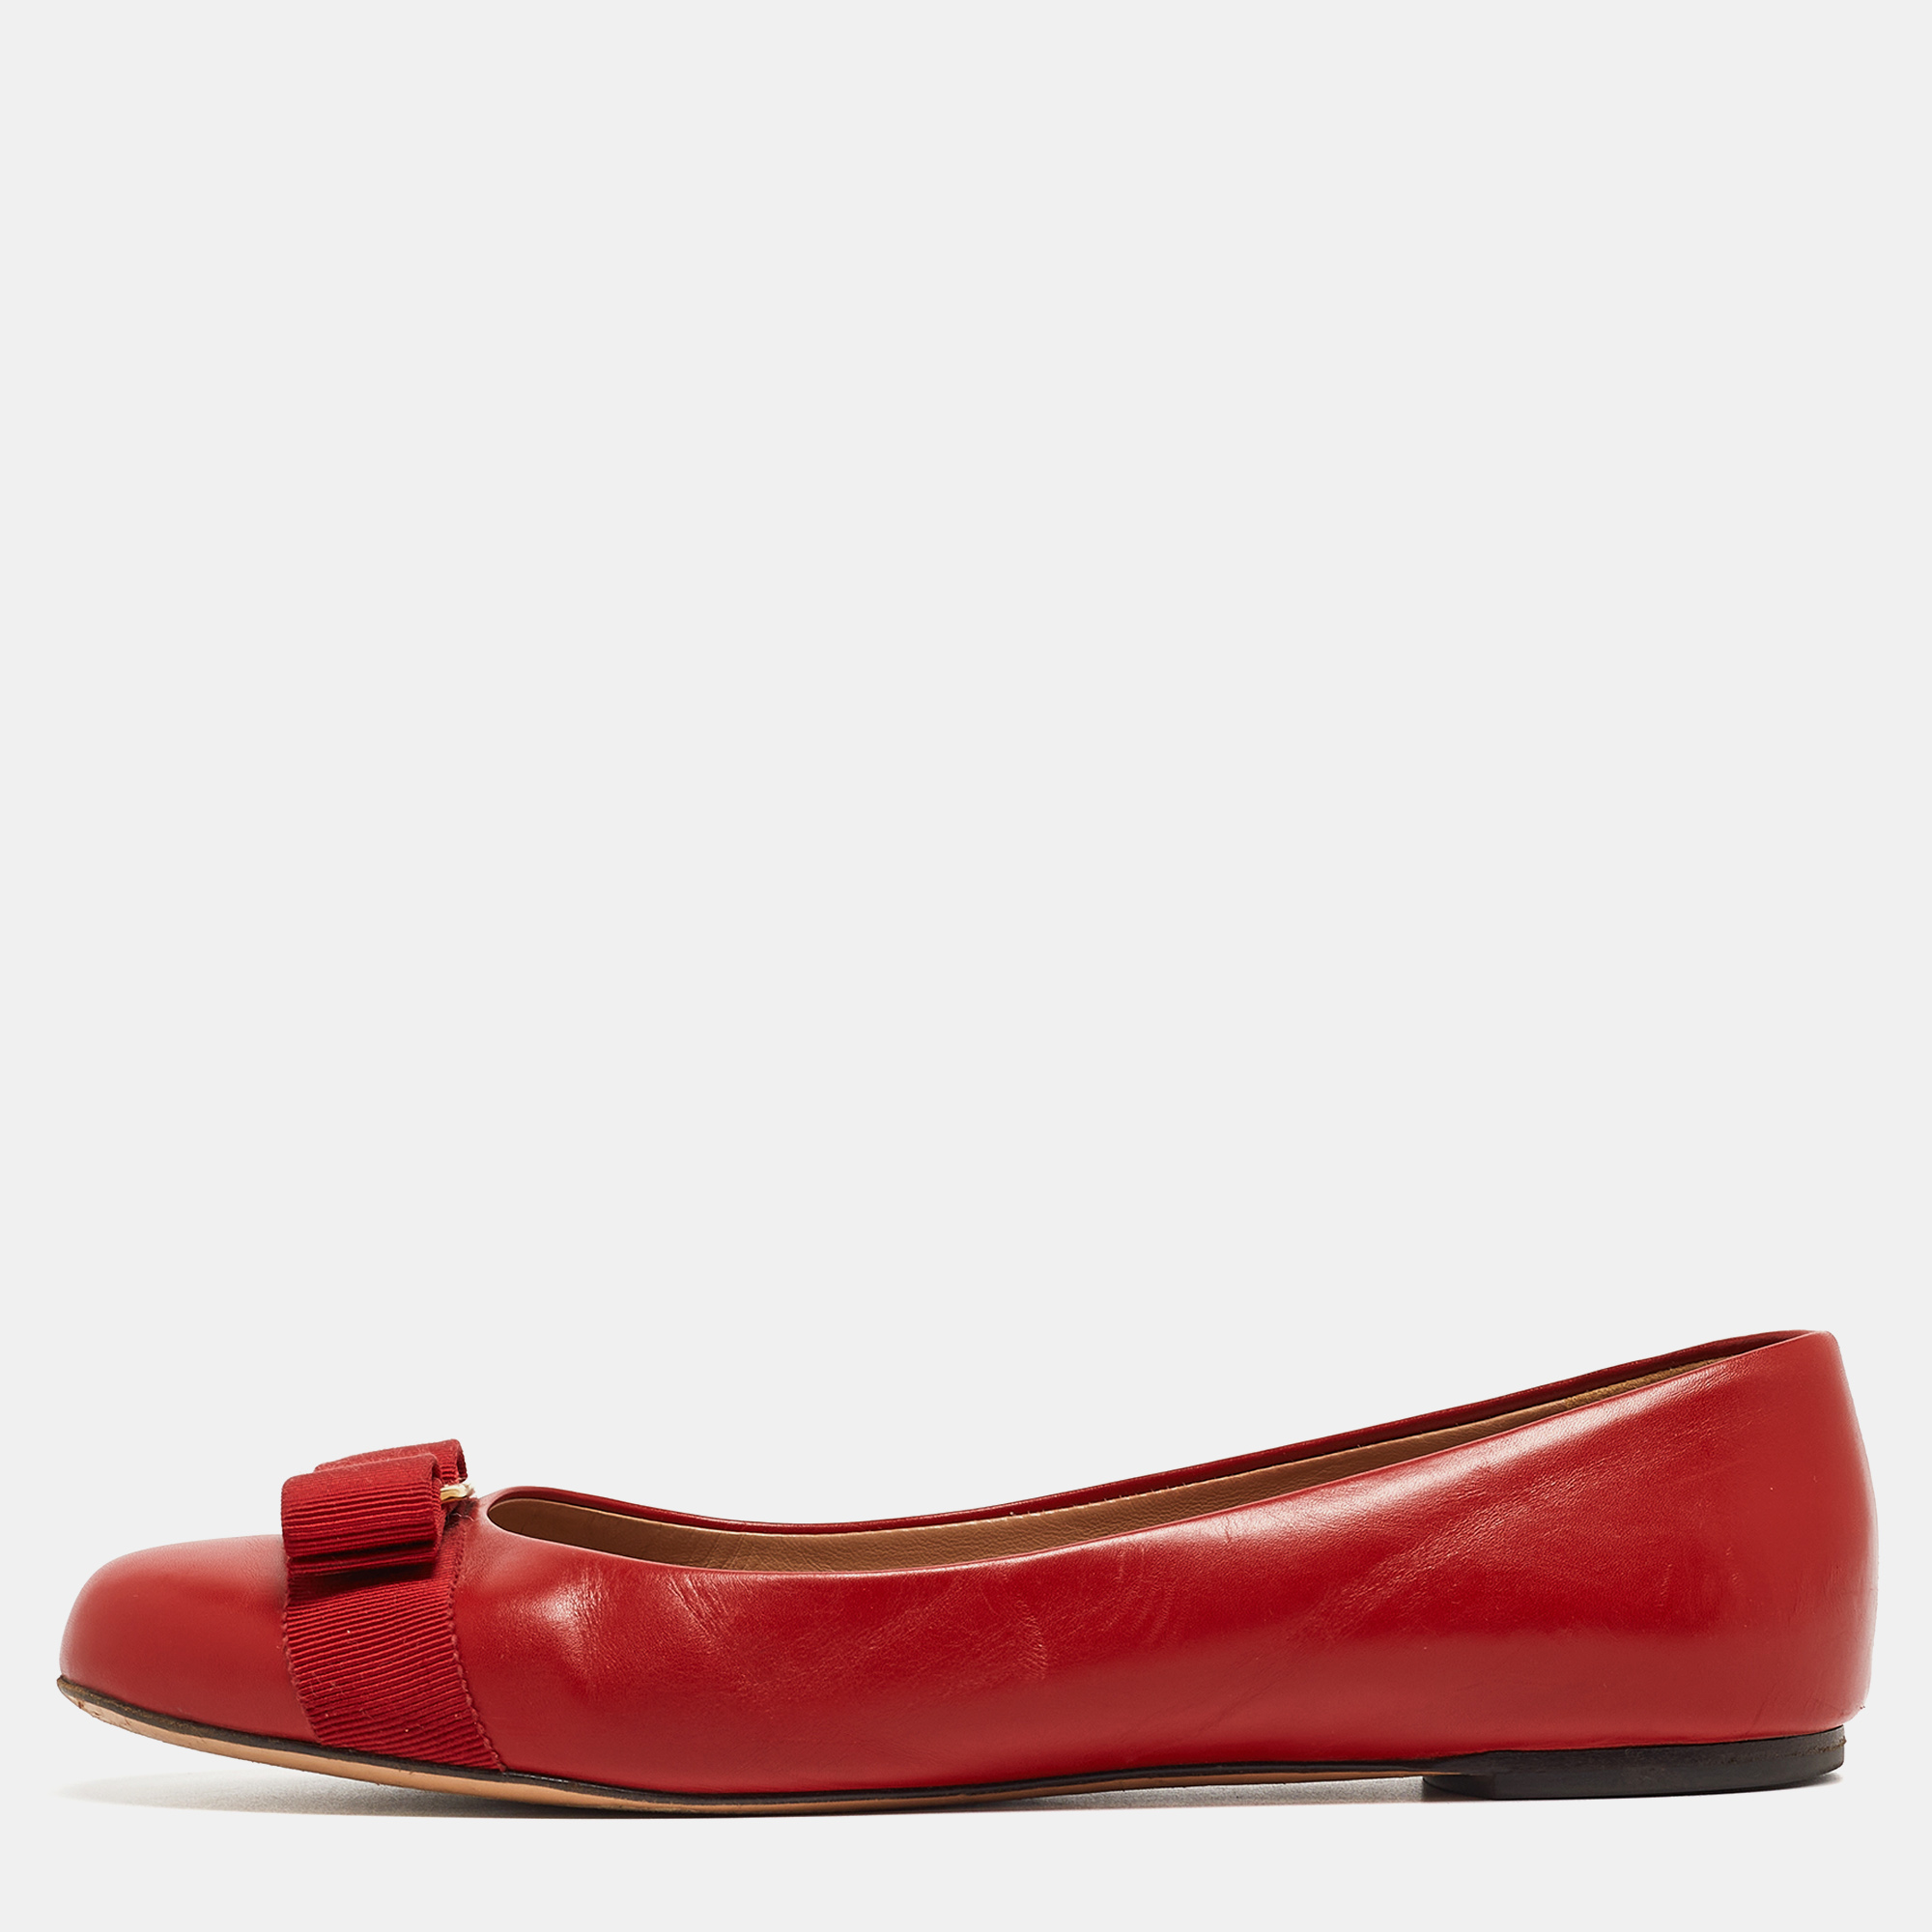 Pre-owned Ferragamo Red Leather Varina Bow Ballet Flats Size 40